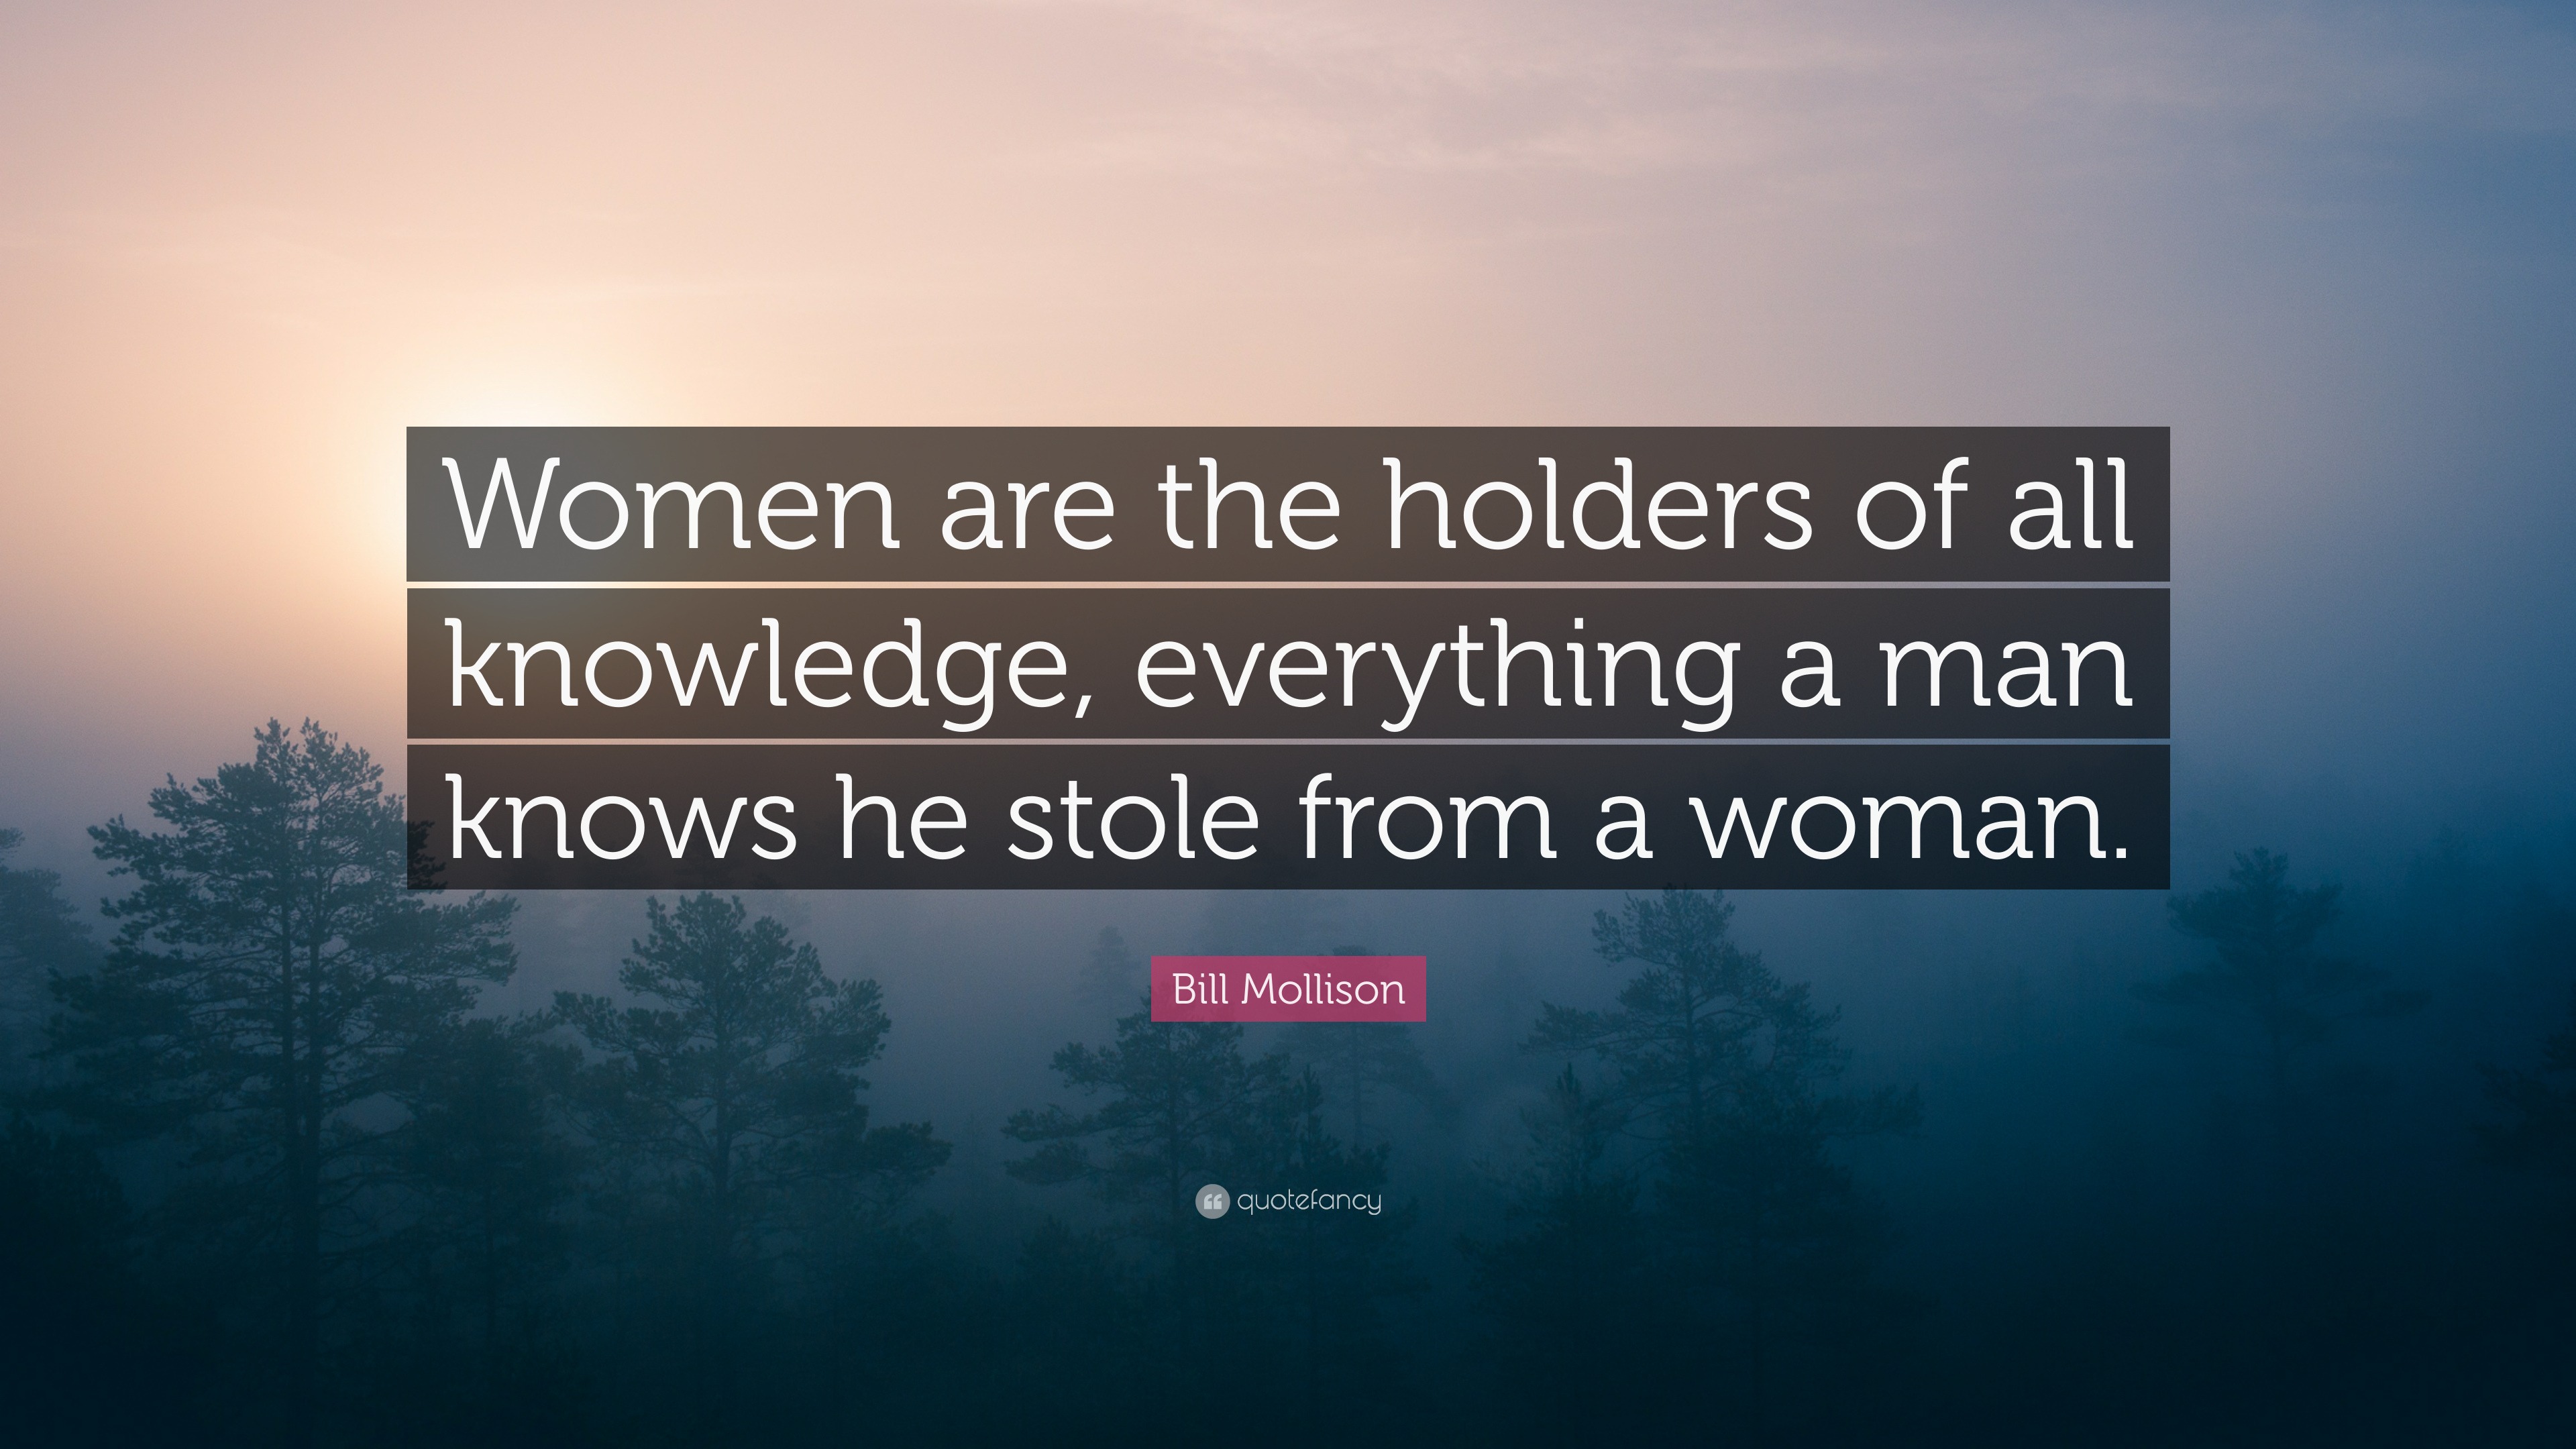 Bill Mollison Quote: “Women are the holders of all knowledge ...